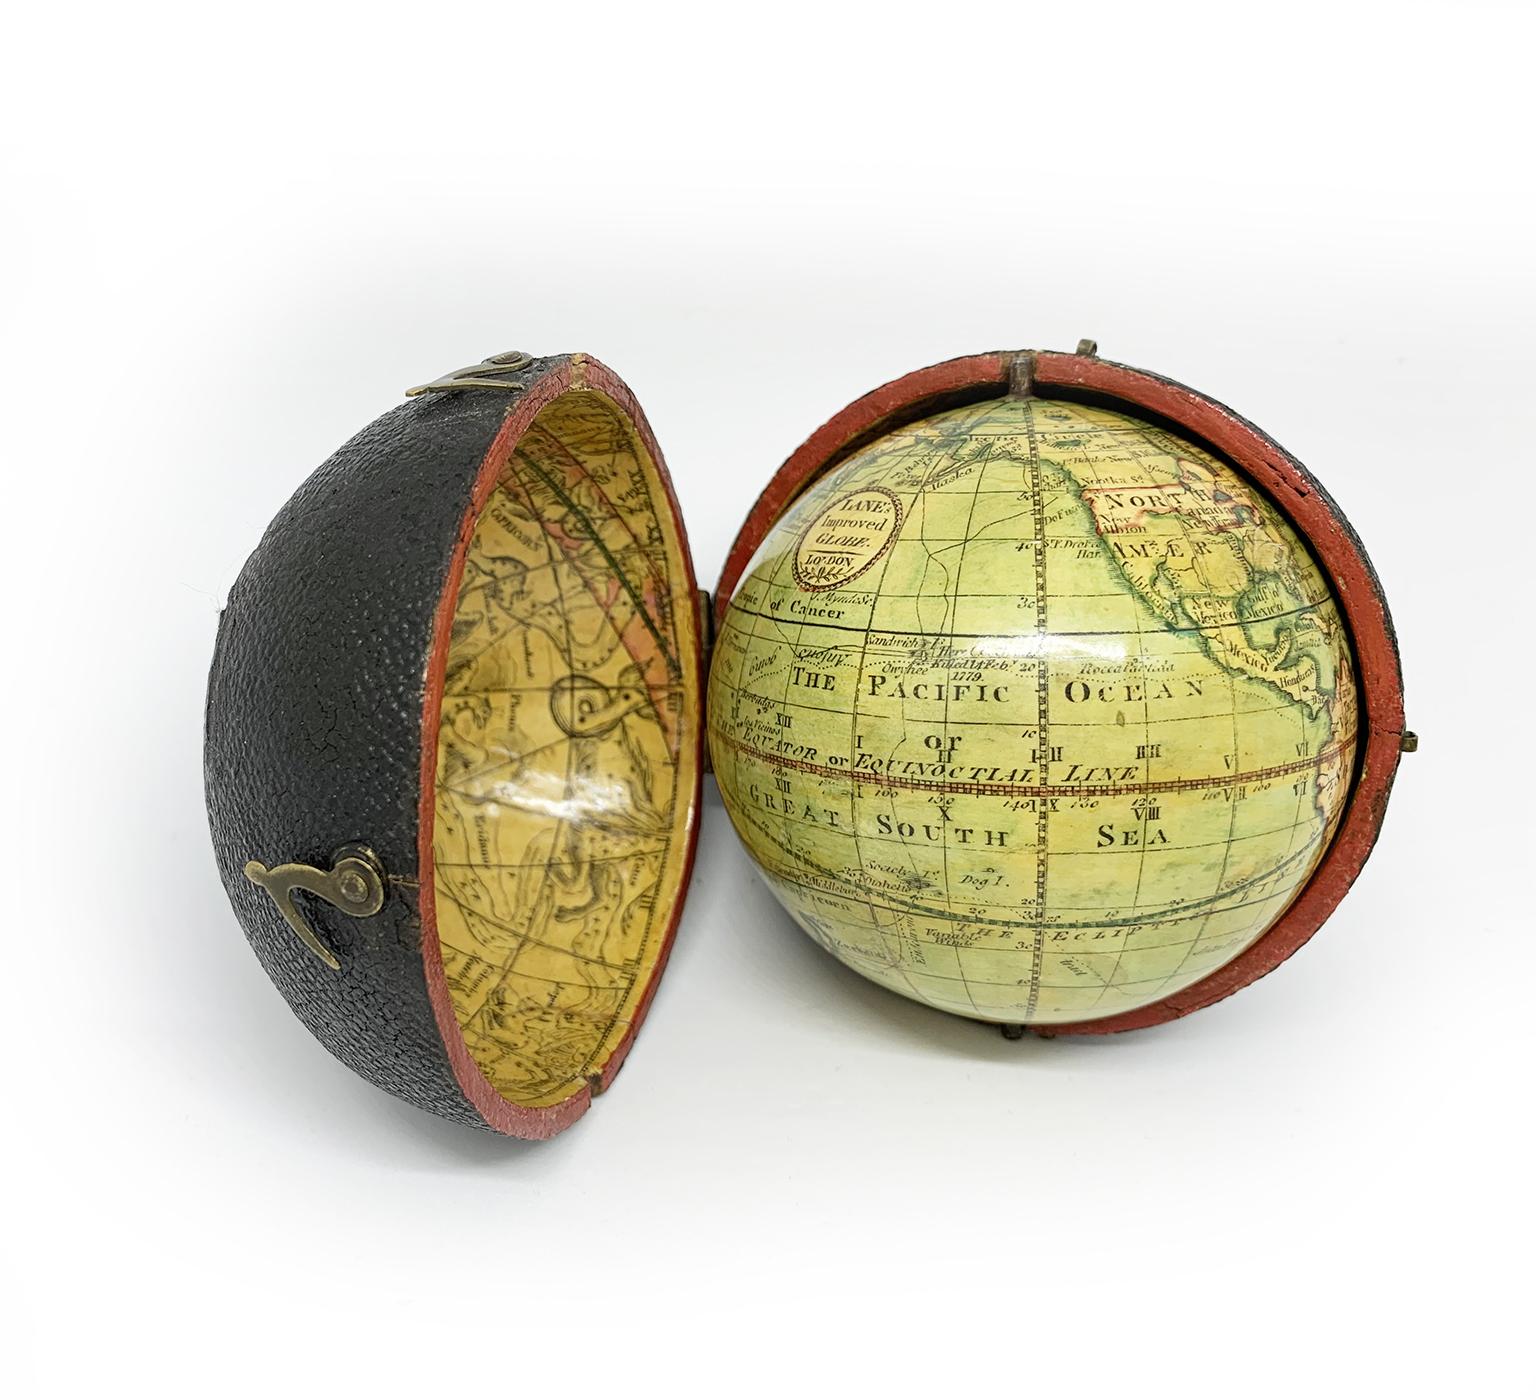 Pocket Globe
Lane, London, between 1817 and 1833

The globe is contained in its original case covered with black leather.
Diameter: globe 2.75 in (7 cm); case 3.26 in (8.3 cm).
Weight: 0.28 lb (128 g)
State of conservation: almost excellent.